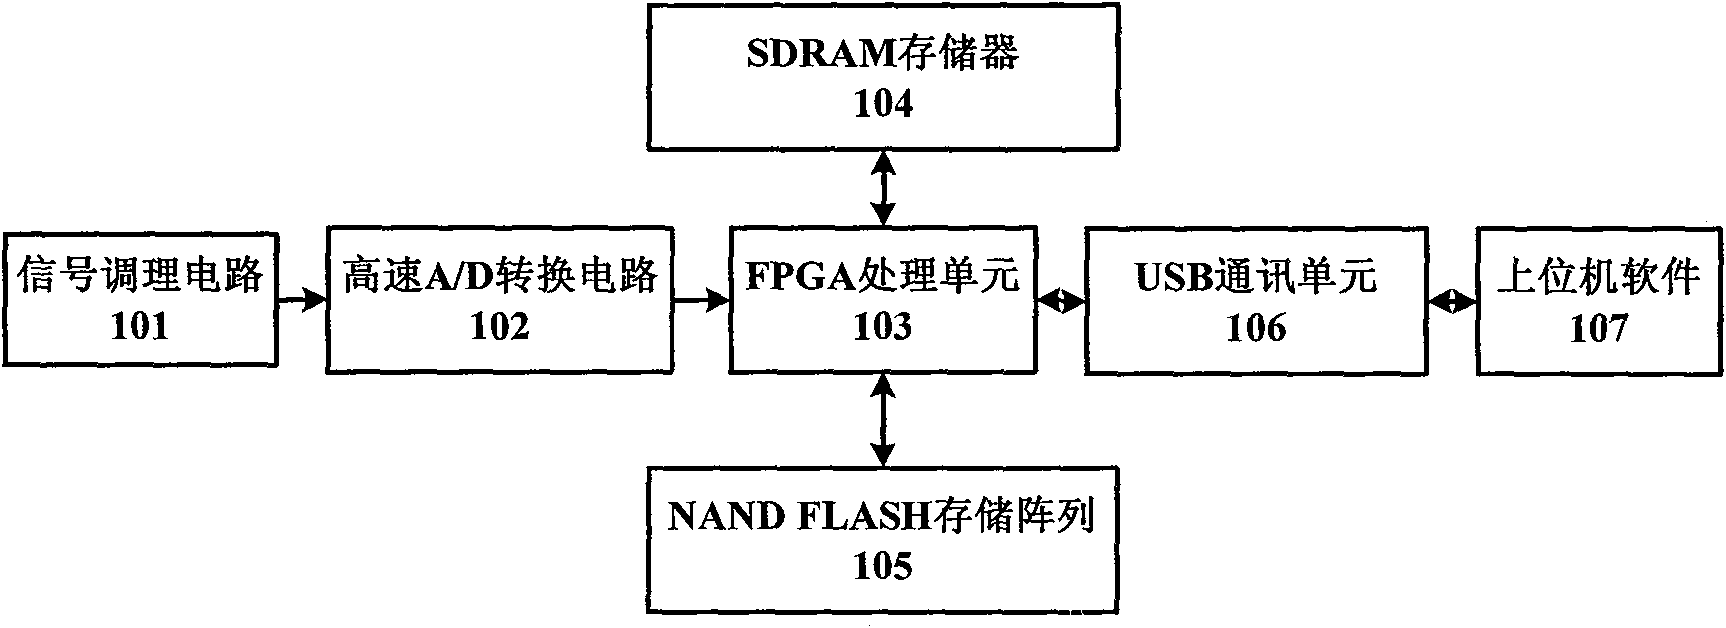 High-speed signal acquisition, storage and playback device based on FPGA